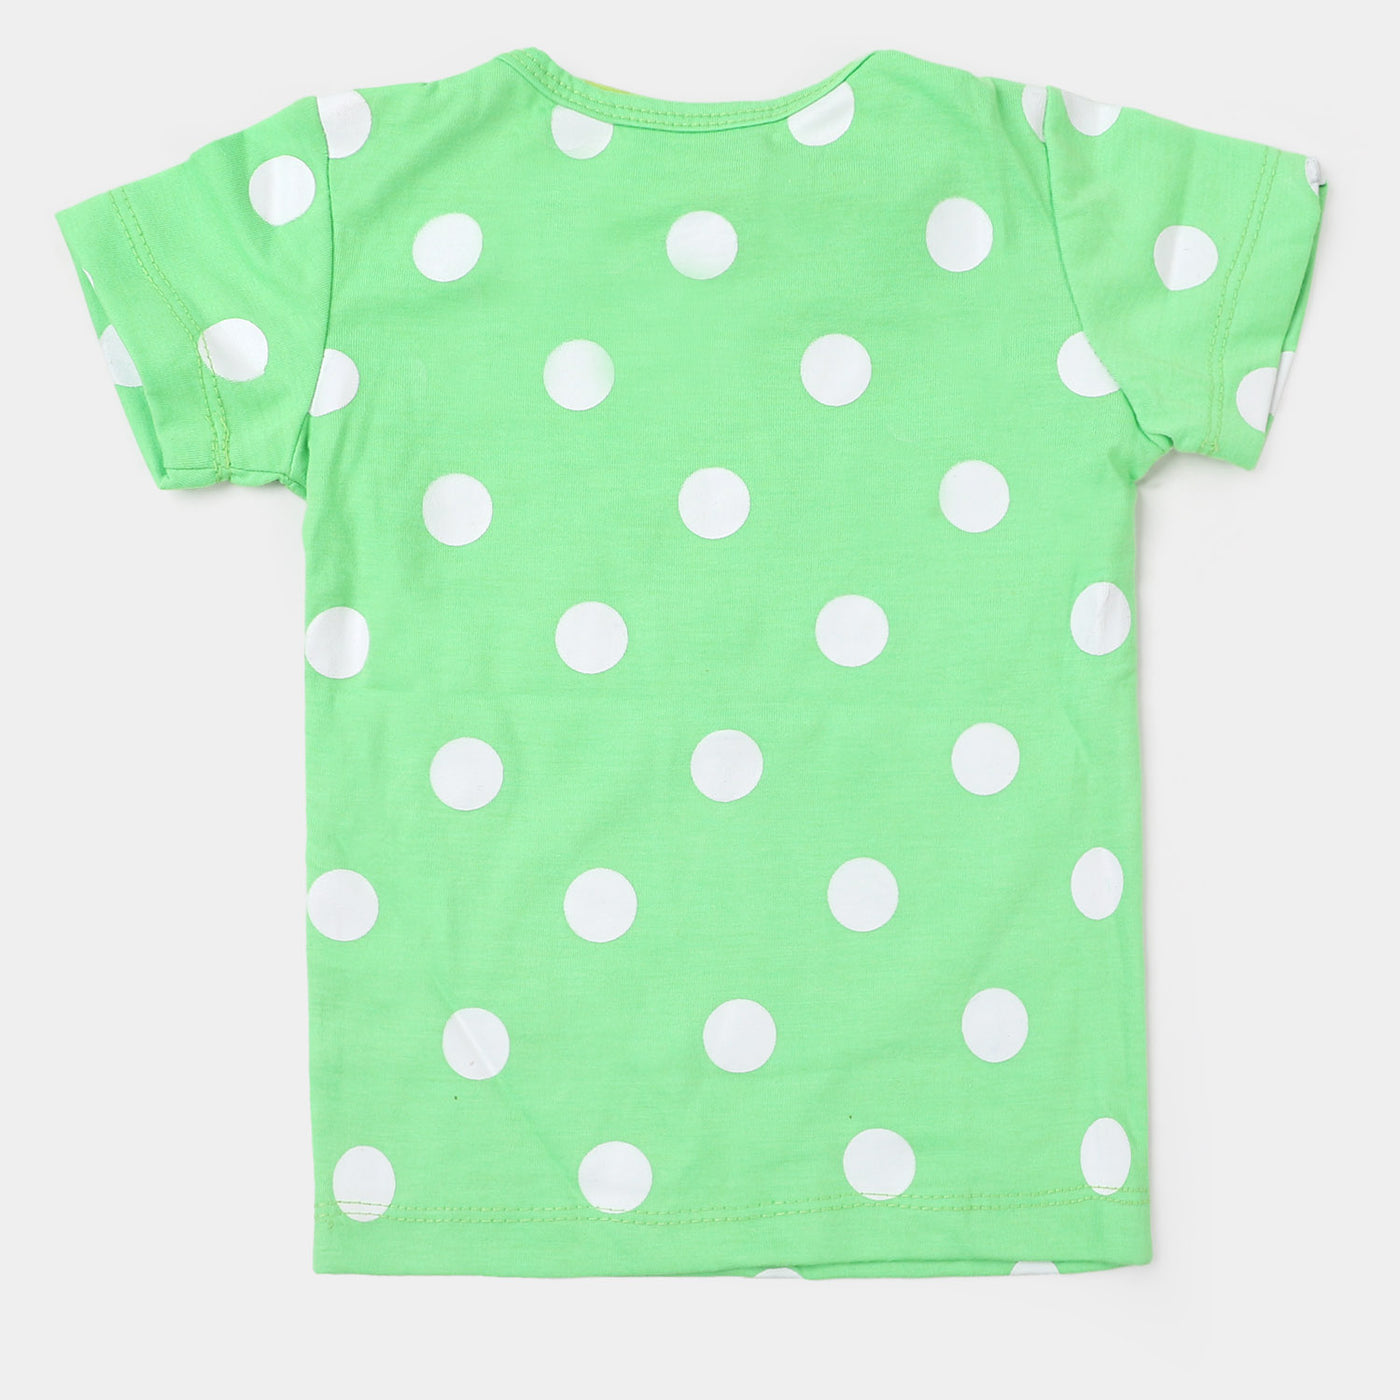 Infant Girls Knitted Suit Stay Positive - Neon Green